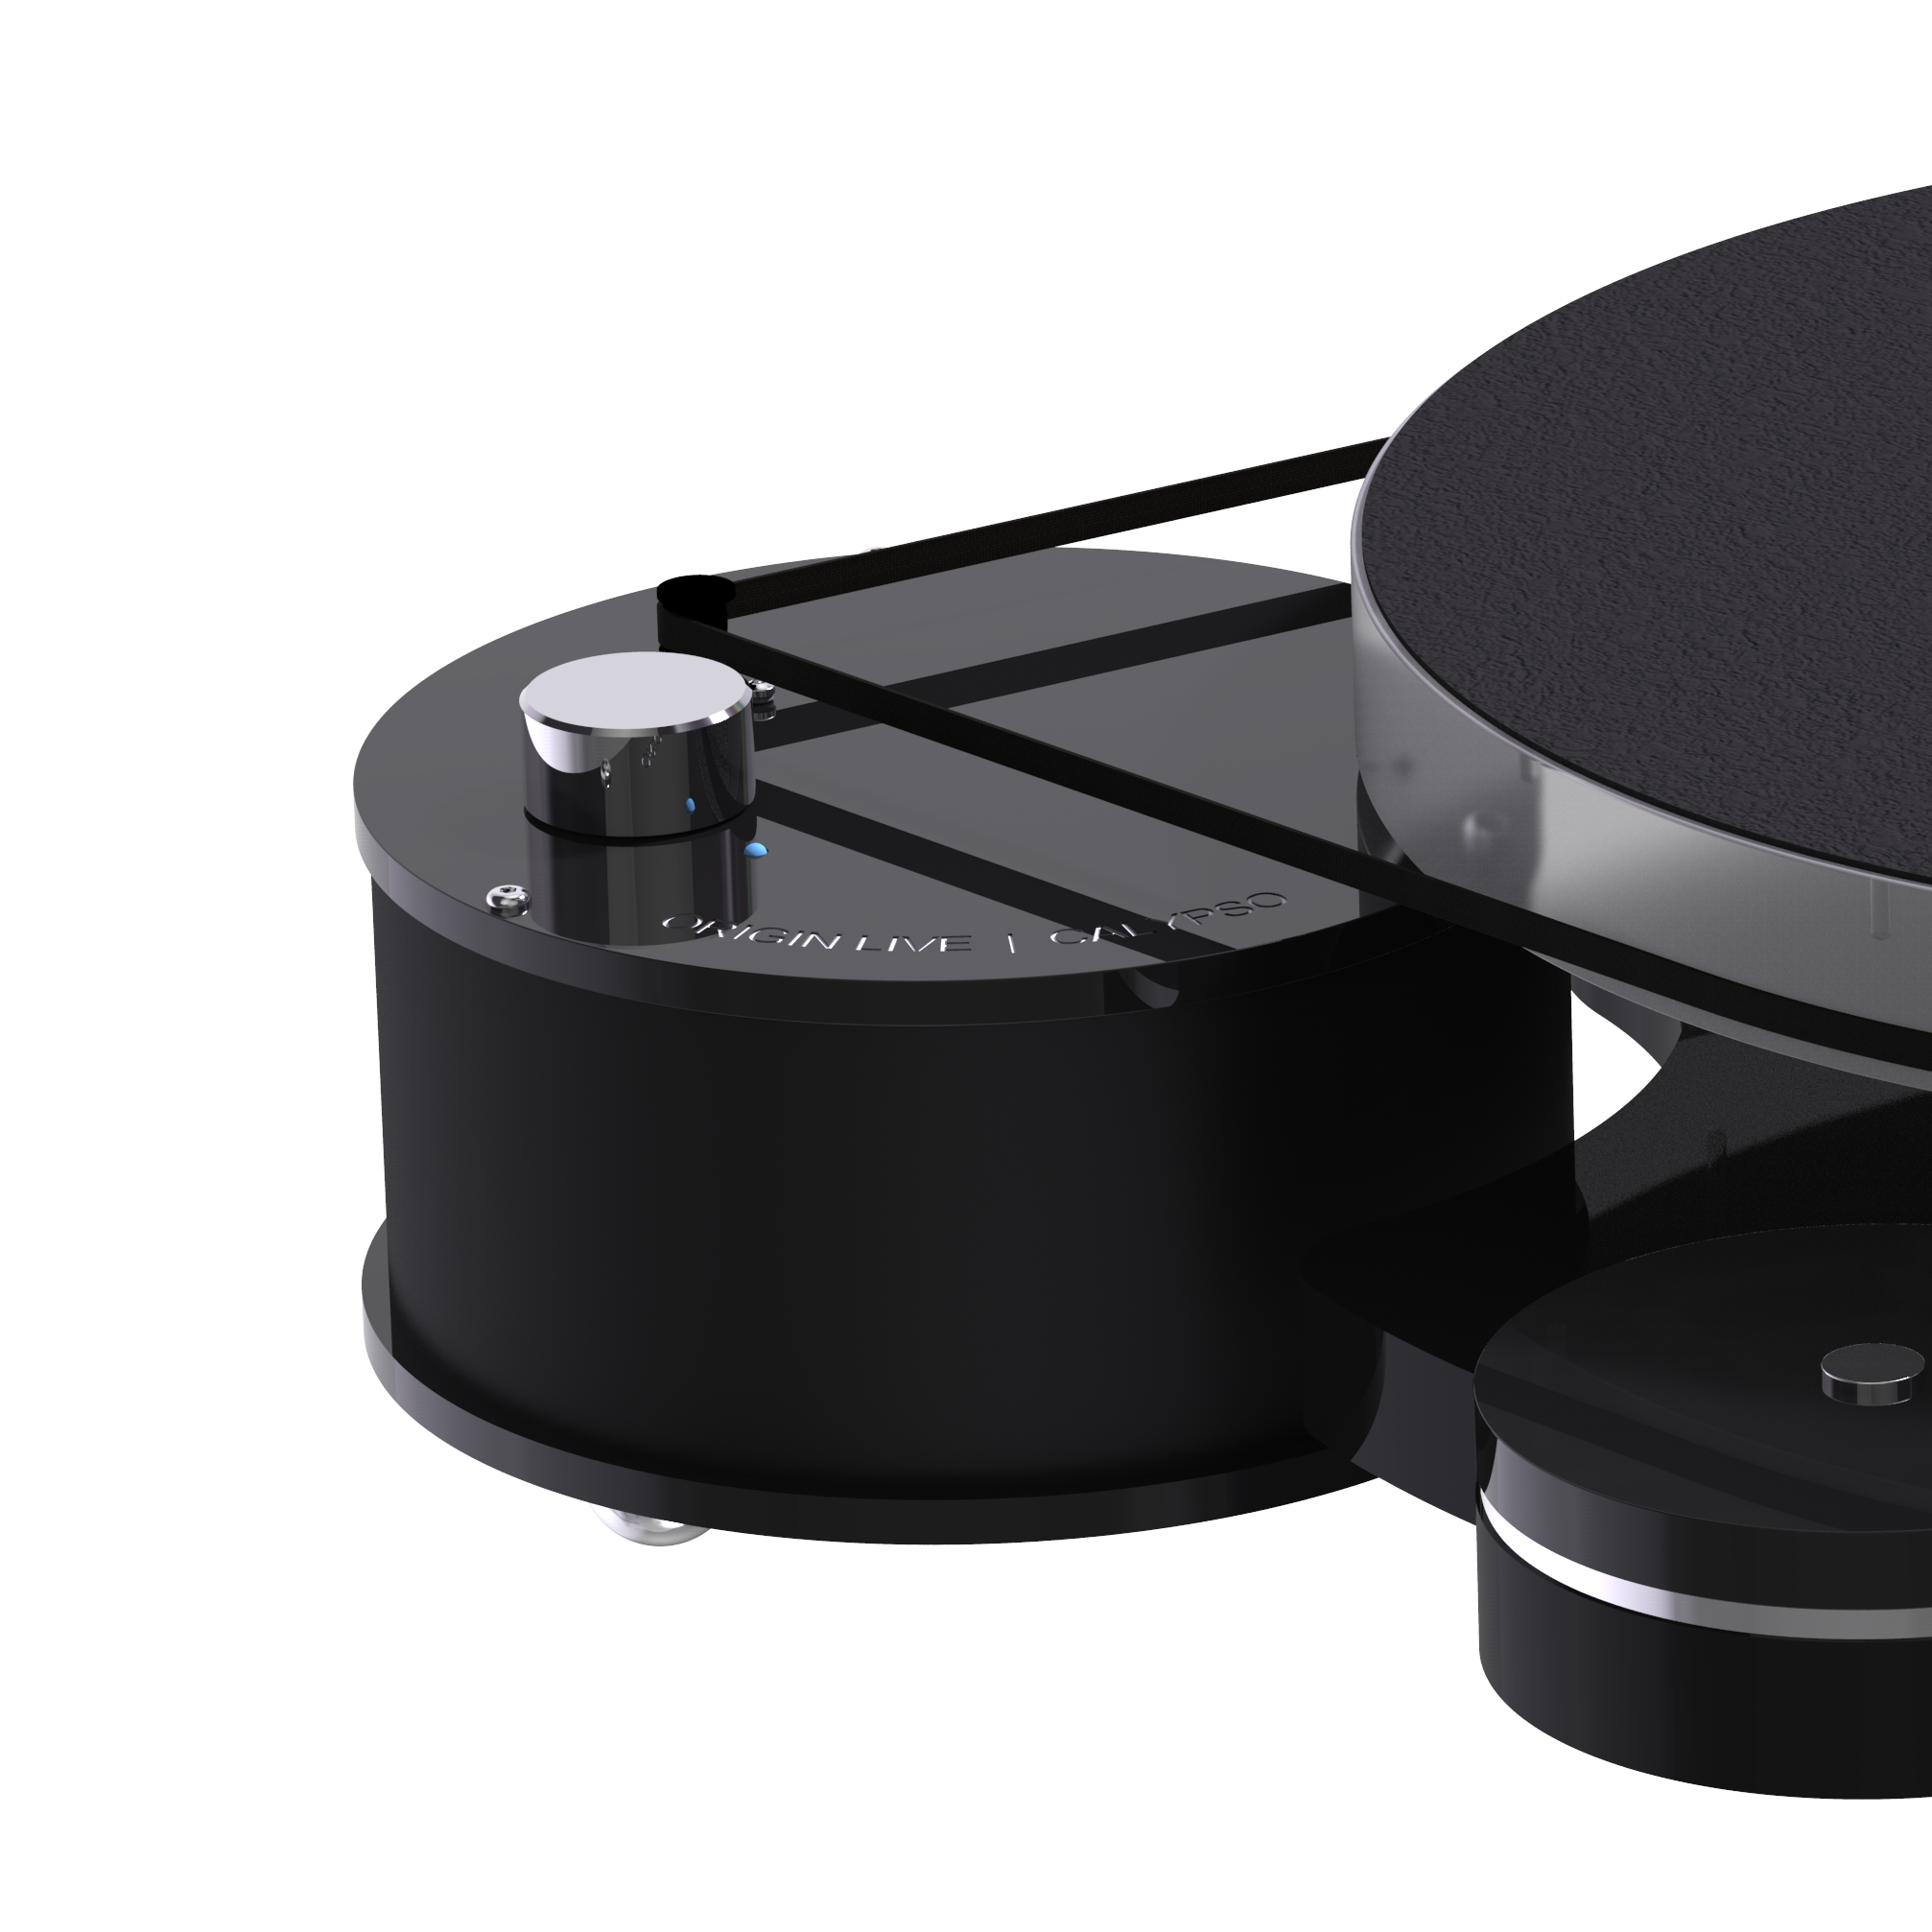 Origin Live Hi-Fi Calypso Turntable Motor Pod Silver tonearm a high end turntable for analogue vinyl audio playback with mid century mid-century retro styling